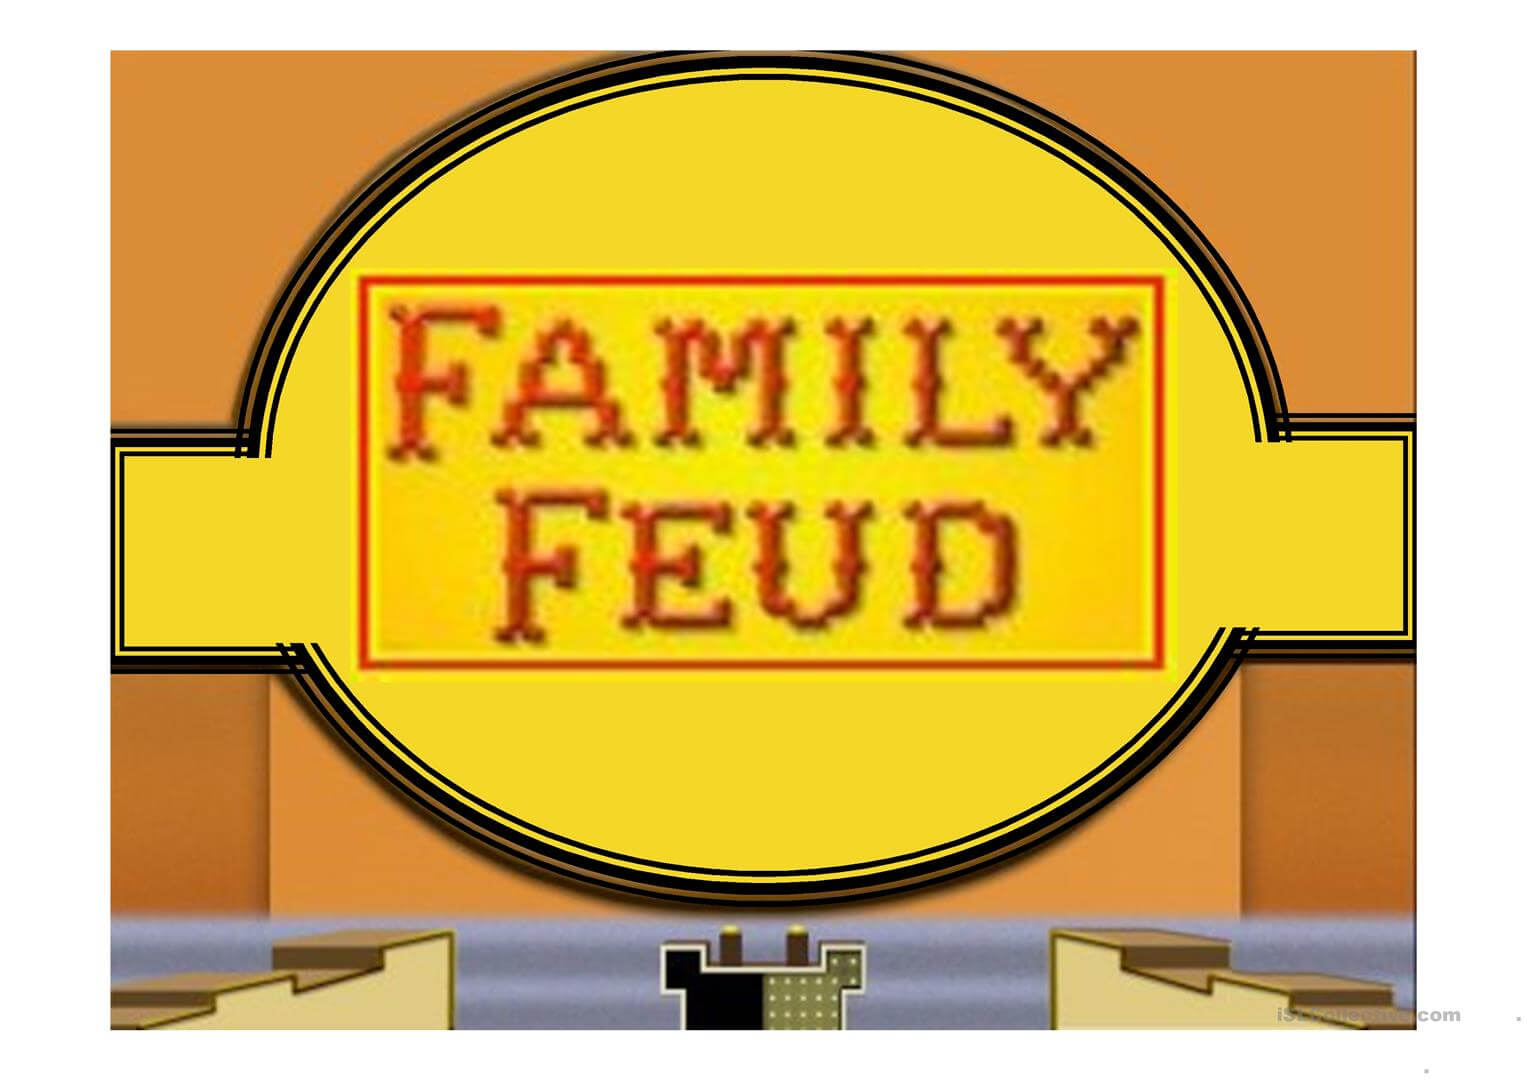 Family Feud Game Power Point Template – English Esl Within Family Feud Game Template Powerpoint Free